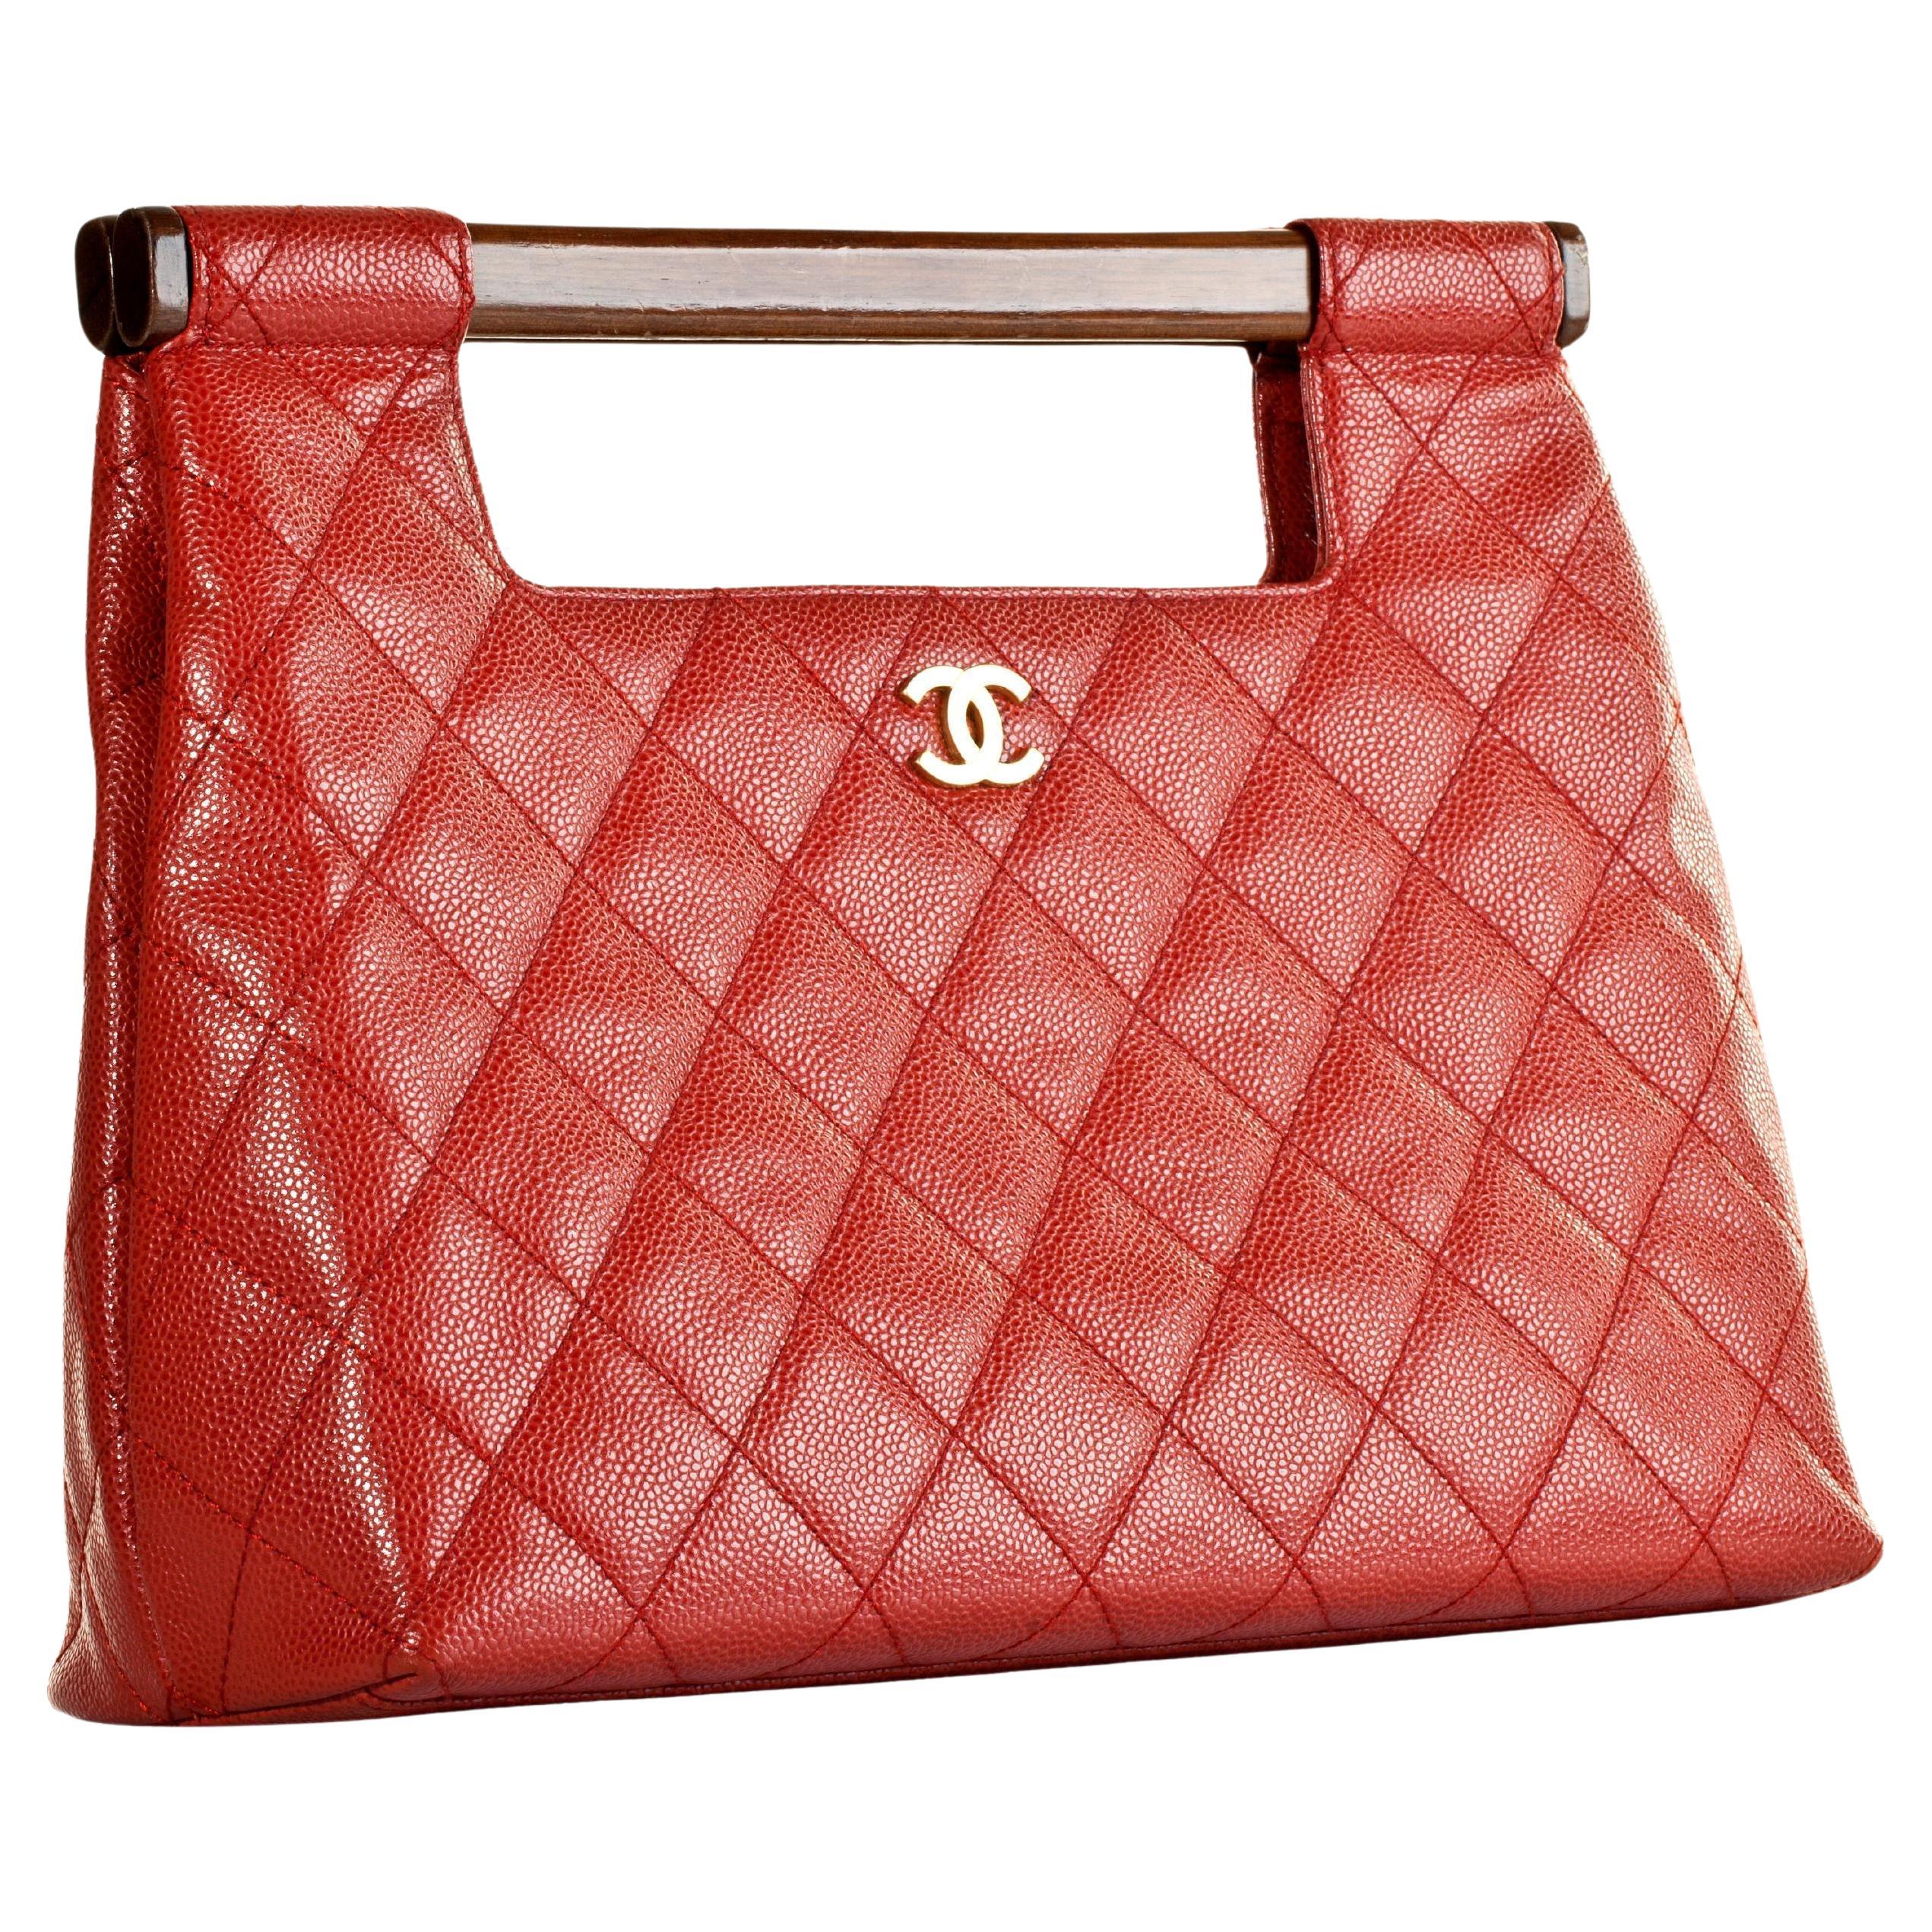 Chanel 2003 Holz Top Handle Rare Red Caviar Jumbo Kelly Envelope Clutch Tote Bag im Angebot 13